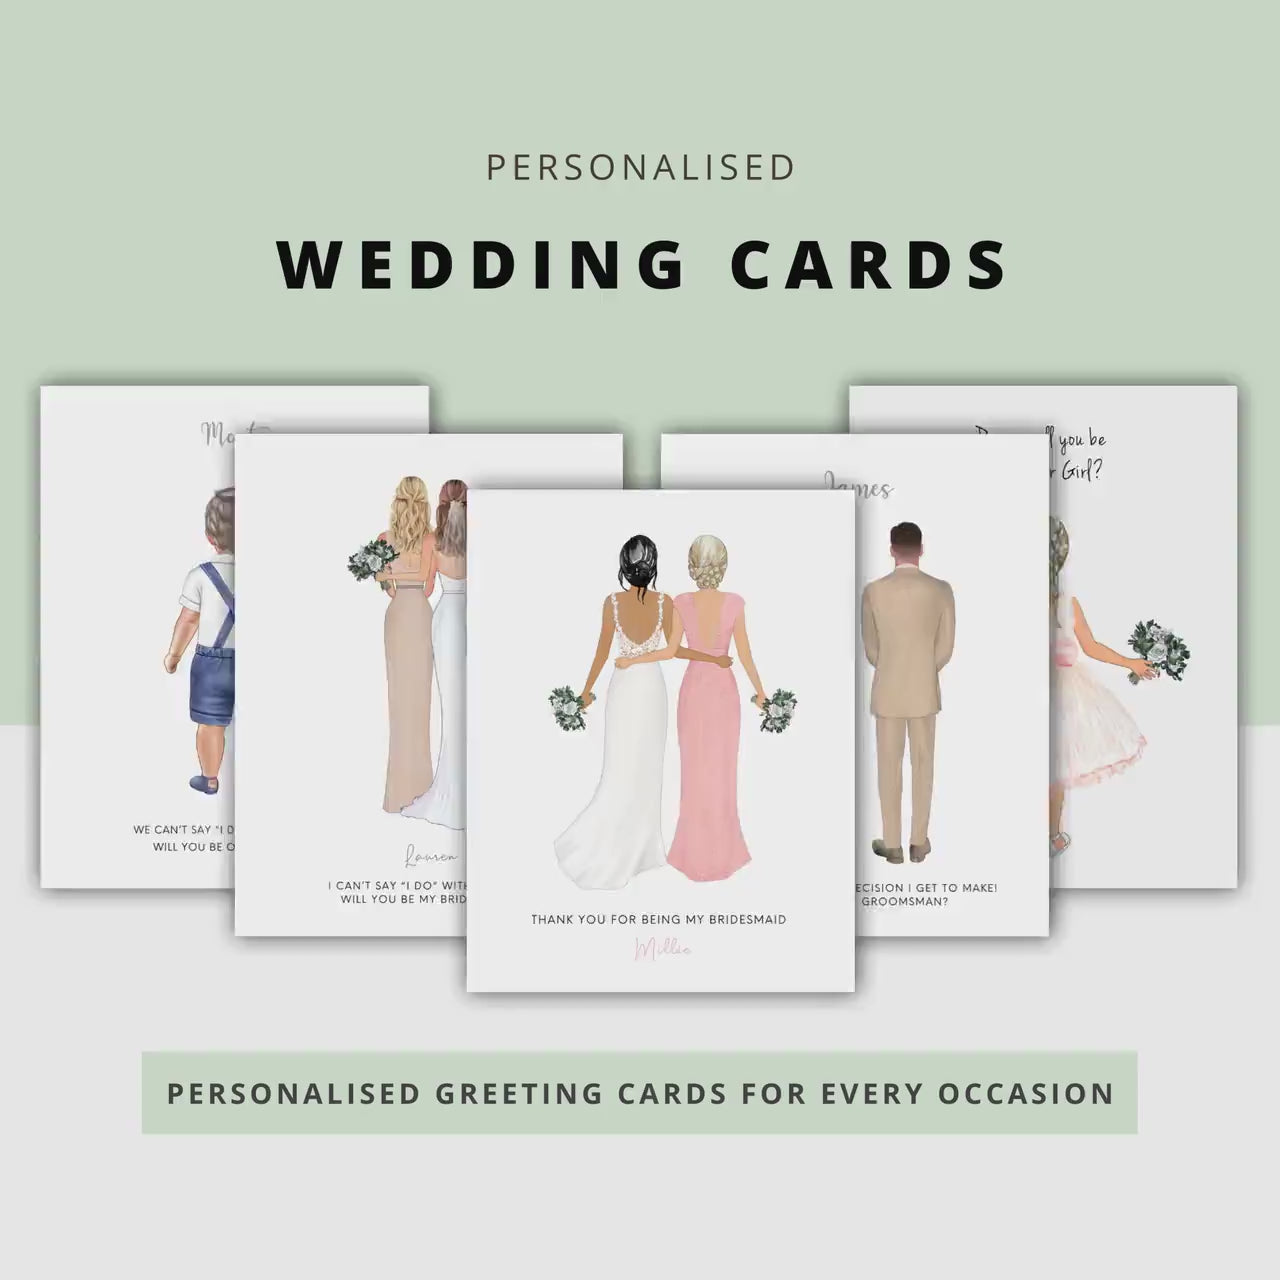 Will You Be My Junior Bridesmaid Greeting Card, Will You Be My Flower Girl Card, Bridesmaid Proposal Card, Thank you for being my Bridesmaid